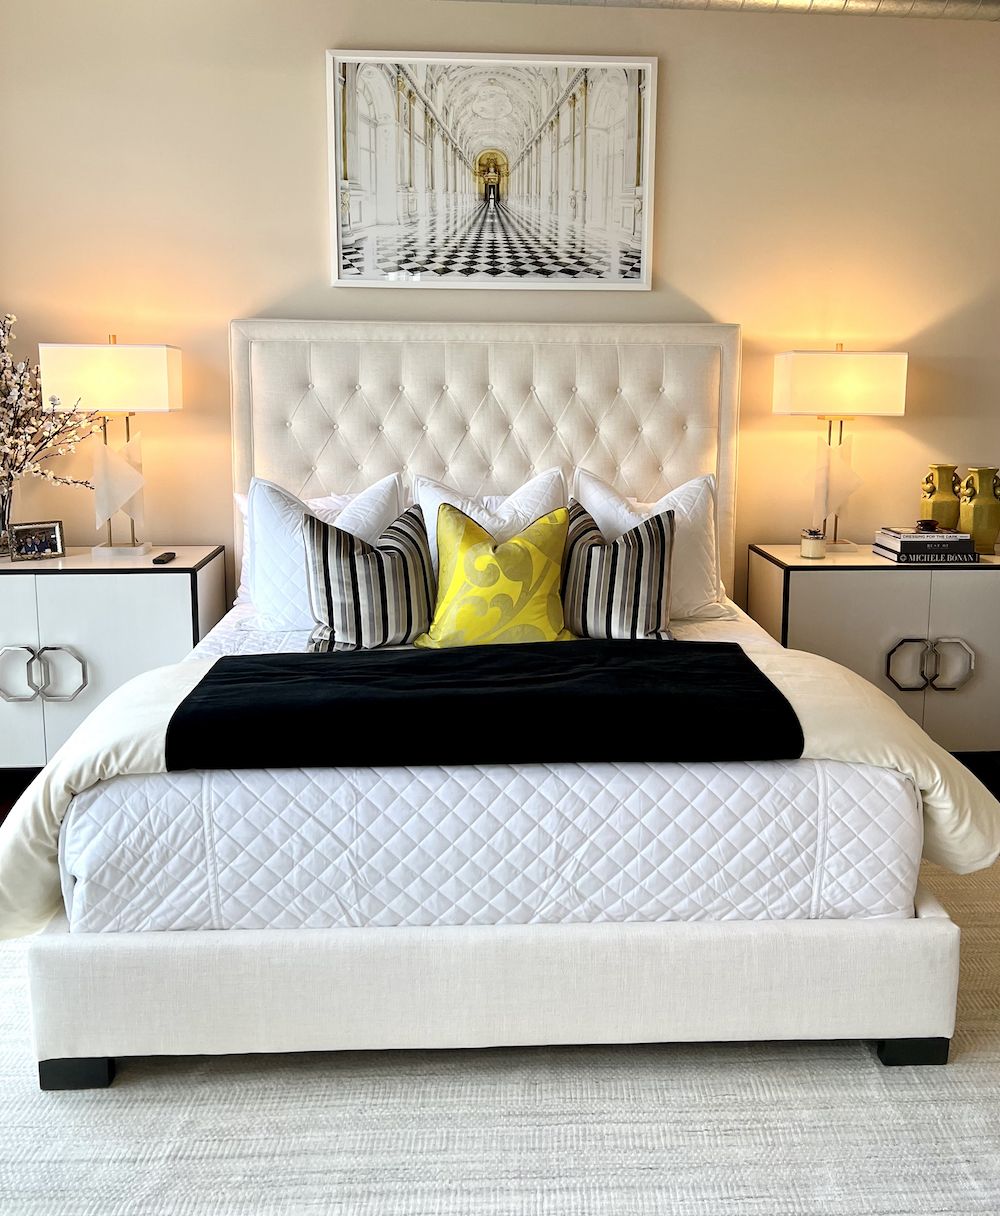 Cream tufted headboard and bed framed with white and gold accent end tables